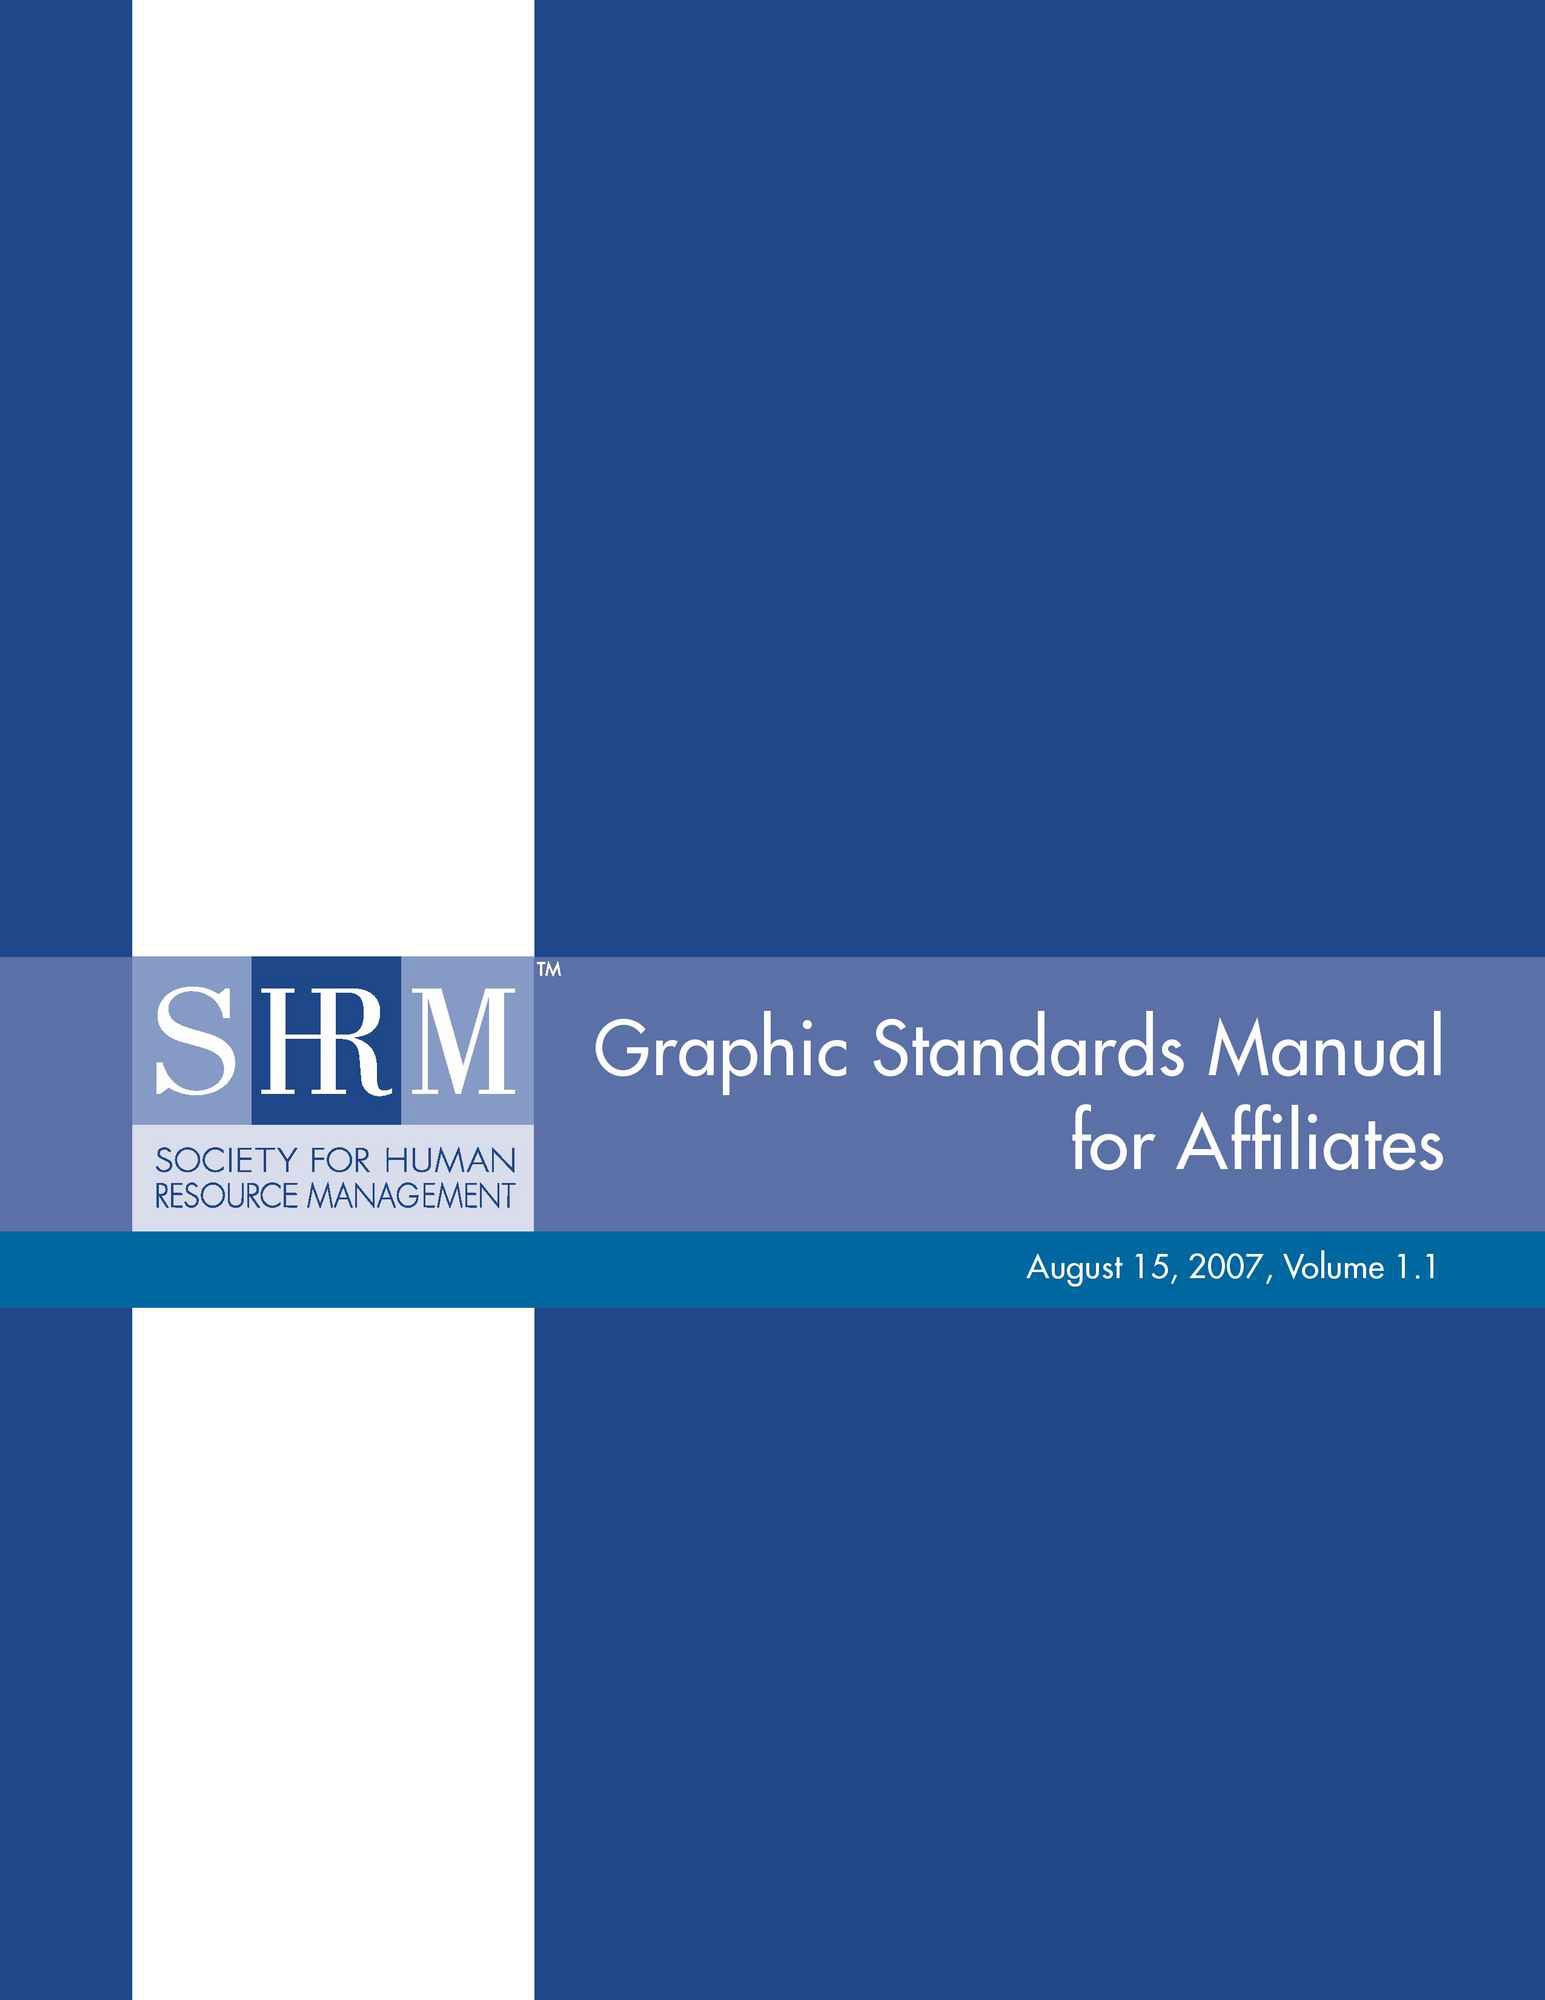 SHRM Society for Human Resource Management Graphic Standards Manual for Affiliates